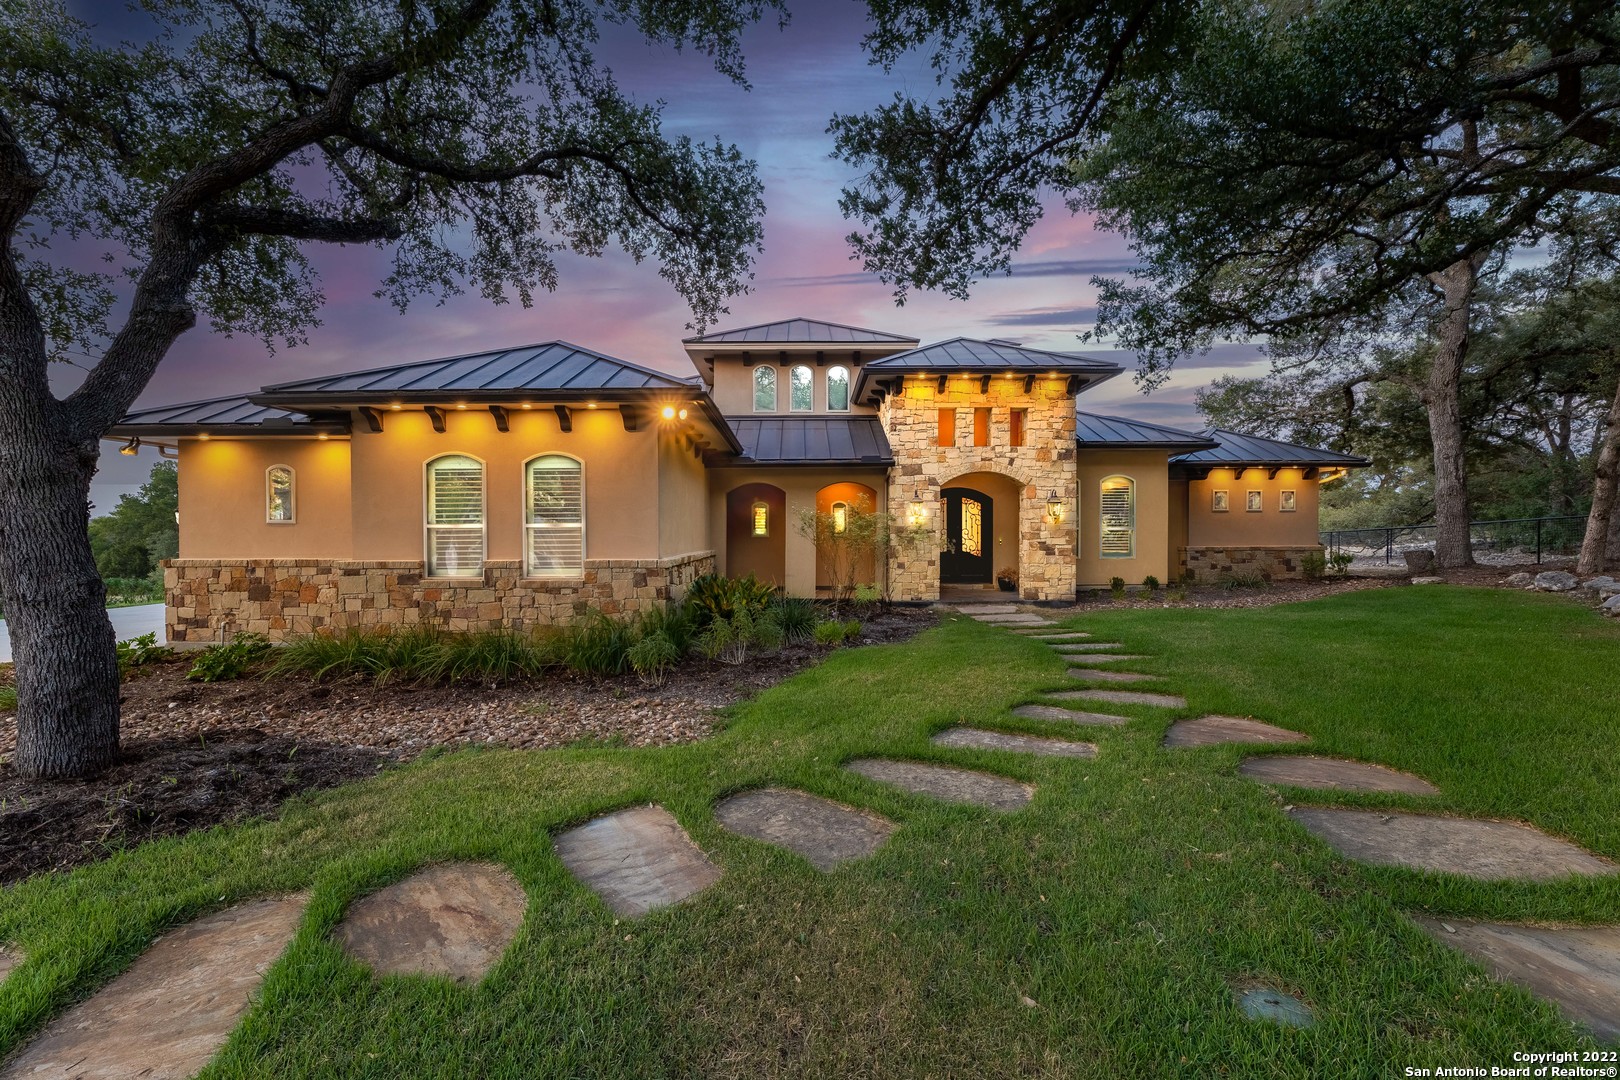 This stunning contemporary hill country home was constructed on a grand scale that exemplifies Texas Luxury in the amenity heavy and highly sought after Vintage Oaks. A vast property set back in a private area entices you through the large formal entry leading you into the heart of this home with an expansive and elegant kitchen that will check every box imaginable. The dining room is accompanied by large windows that view the park-sized backyard, and the living room is fitted with a stone fireplace, built-in shelving, and open to the massive covered porch, complete with an outdoor kitchen, ceiling fans, and solid countertops. The Primary Bedroom and one extra bedroom are situated on the main level with dedicated bathrooms. The primary bath includes dual vanities, a soaking tub, and a large walk-in shower with built-in seating. The best part of this opulent primary suite could be the walk-in closet. Other outstanding features include a tremendous sized office with built-in desk and shelving, a media room fully functional and ready to view, 2.5 baths on the main level, a laundry room with plenty of space and storage, three-car garage, circular drive, top of the line appliances, extra game room upstairs, and double-desk off of the main living area. The amount of life this home has and will comfortably contain is formattable and done with ease. It is a property that will meet the needs of many and offer a lifestyle few can. This doesn't even begin to touch on the community itself and what it has to offer. So bring your life and settle in.